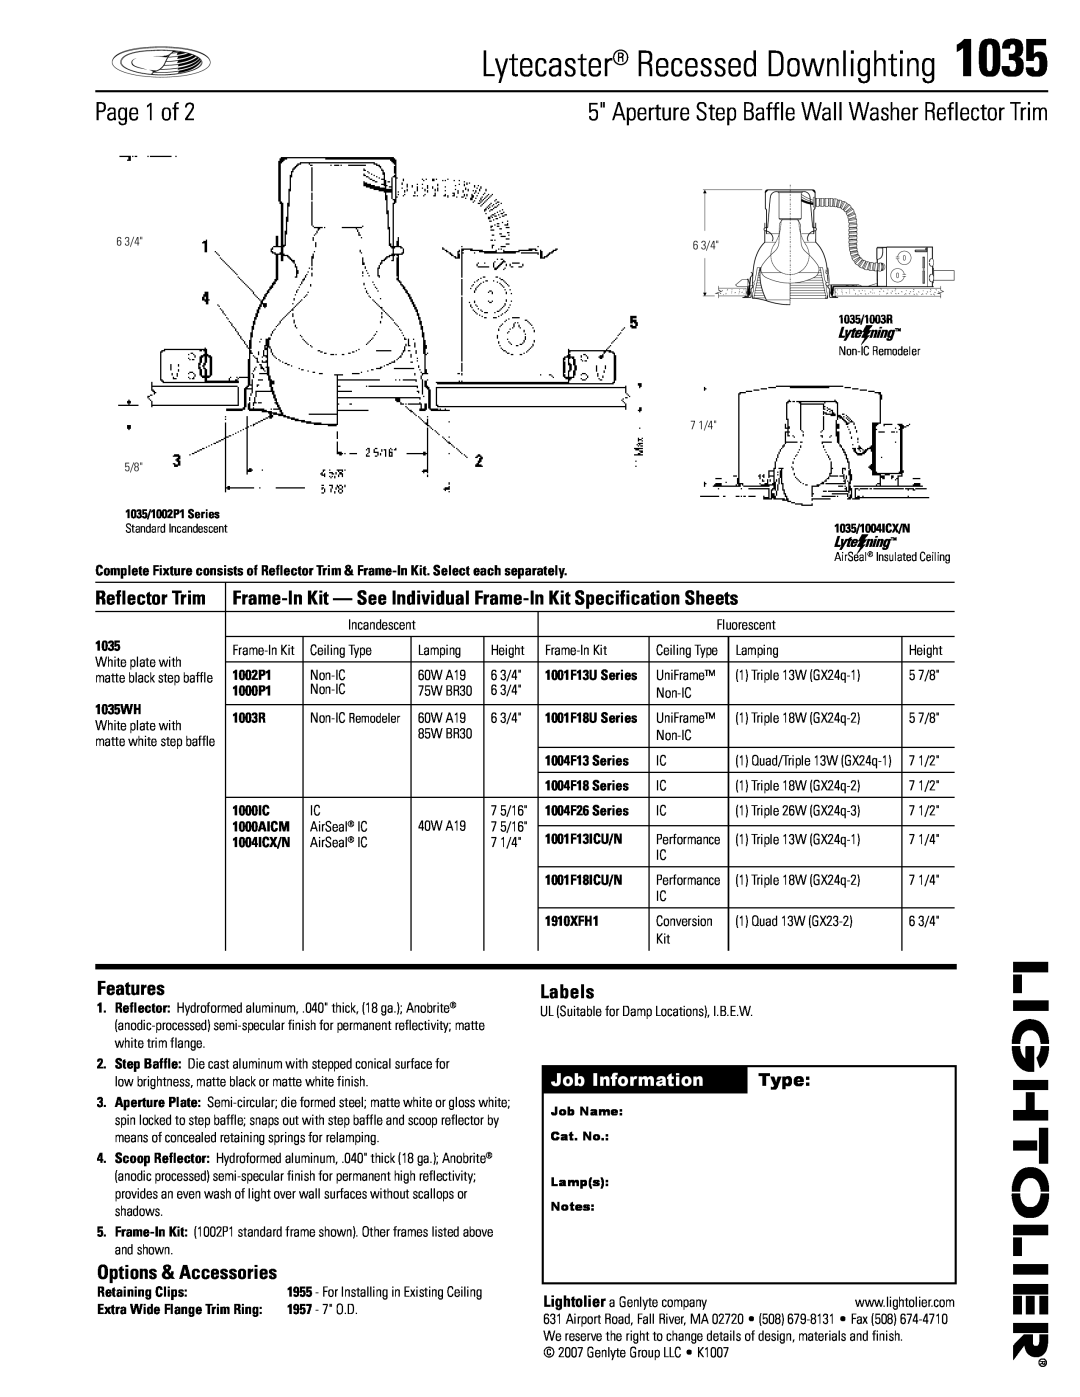 Lightolier 1035 specifications Lytecaster Recessed Downlighting, Page 1 of, Job Information, Type, Features, Labels 